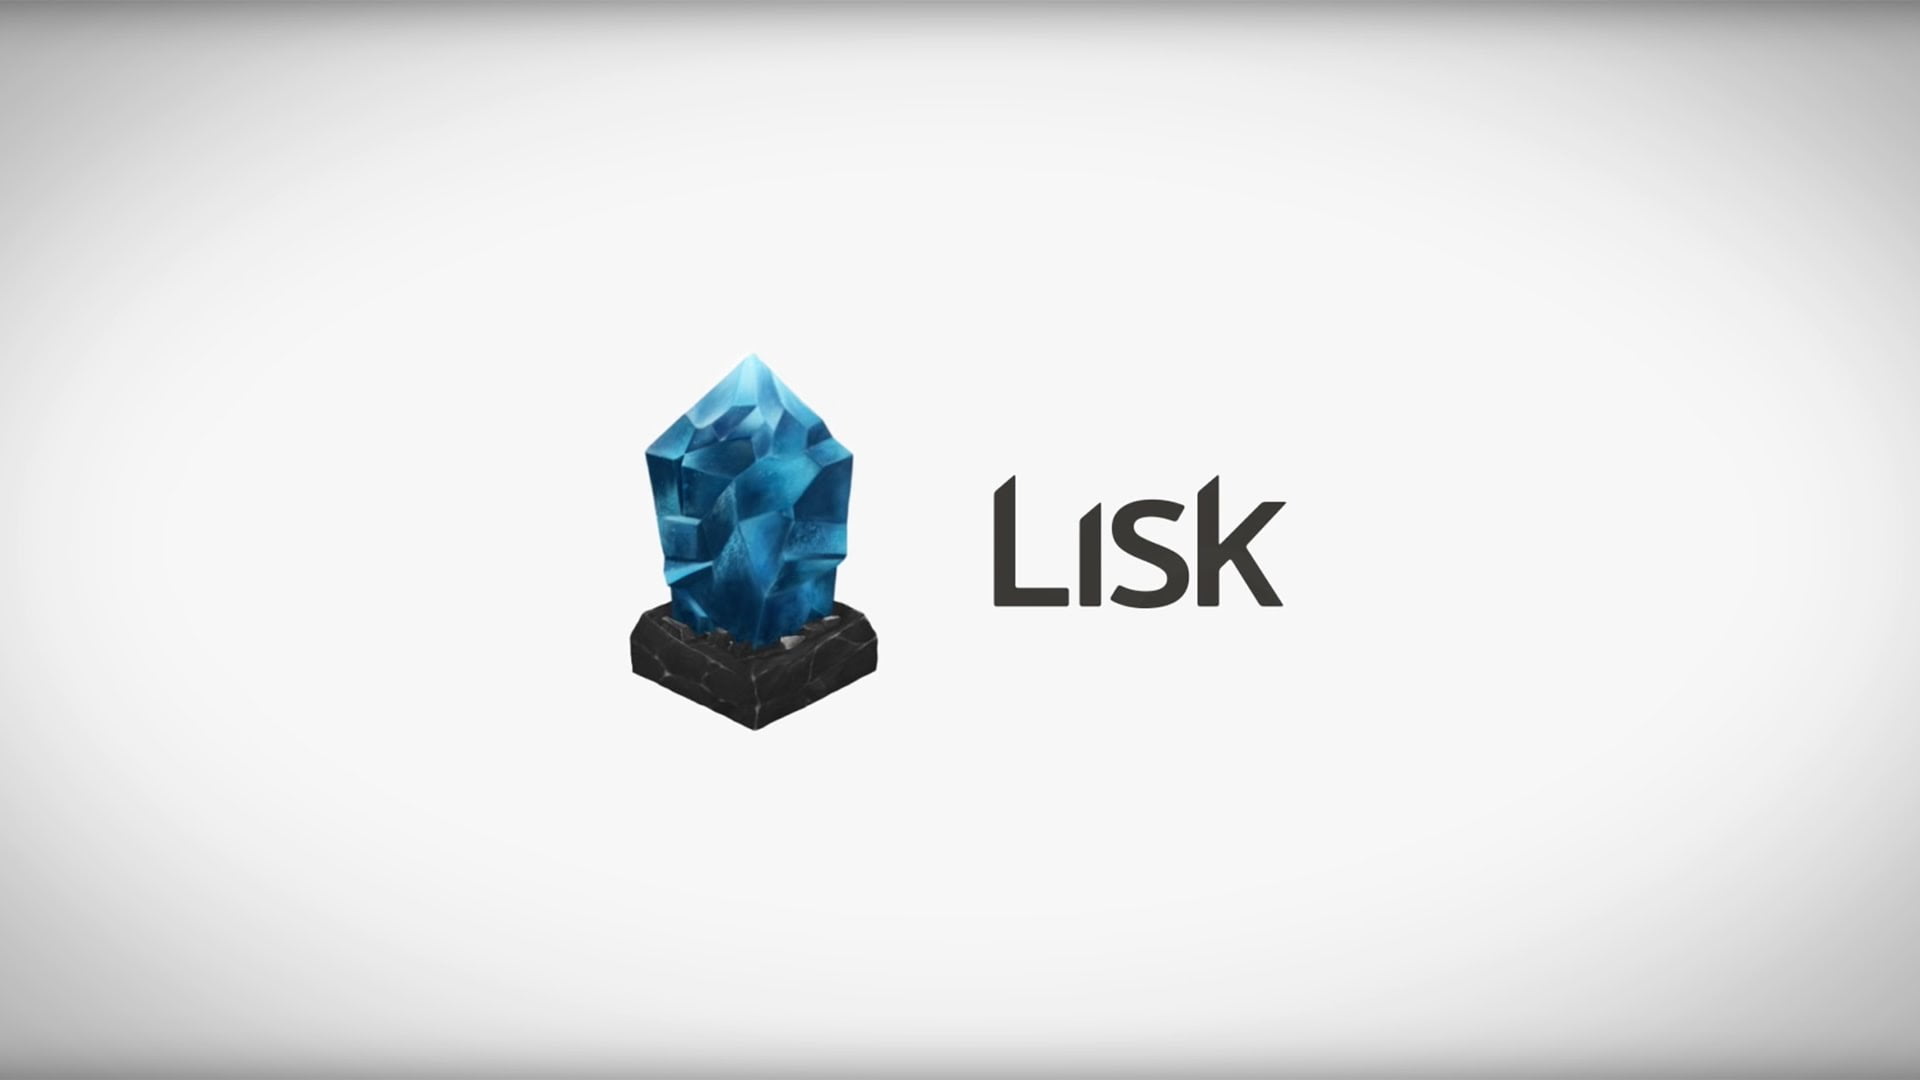 Lisk Promotes Community Building Exercise Contests & Community Fund